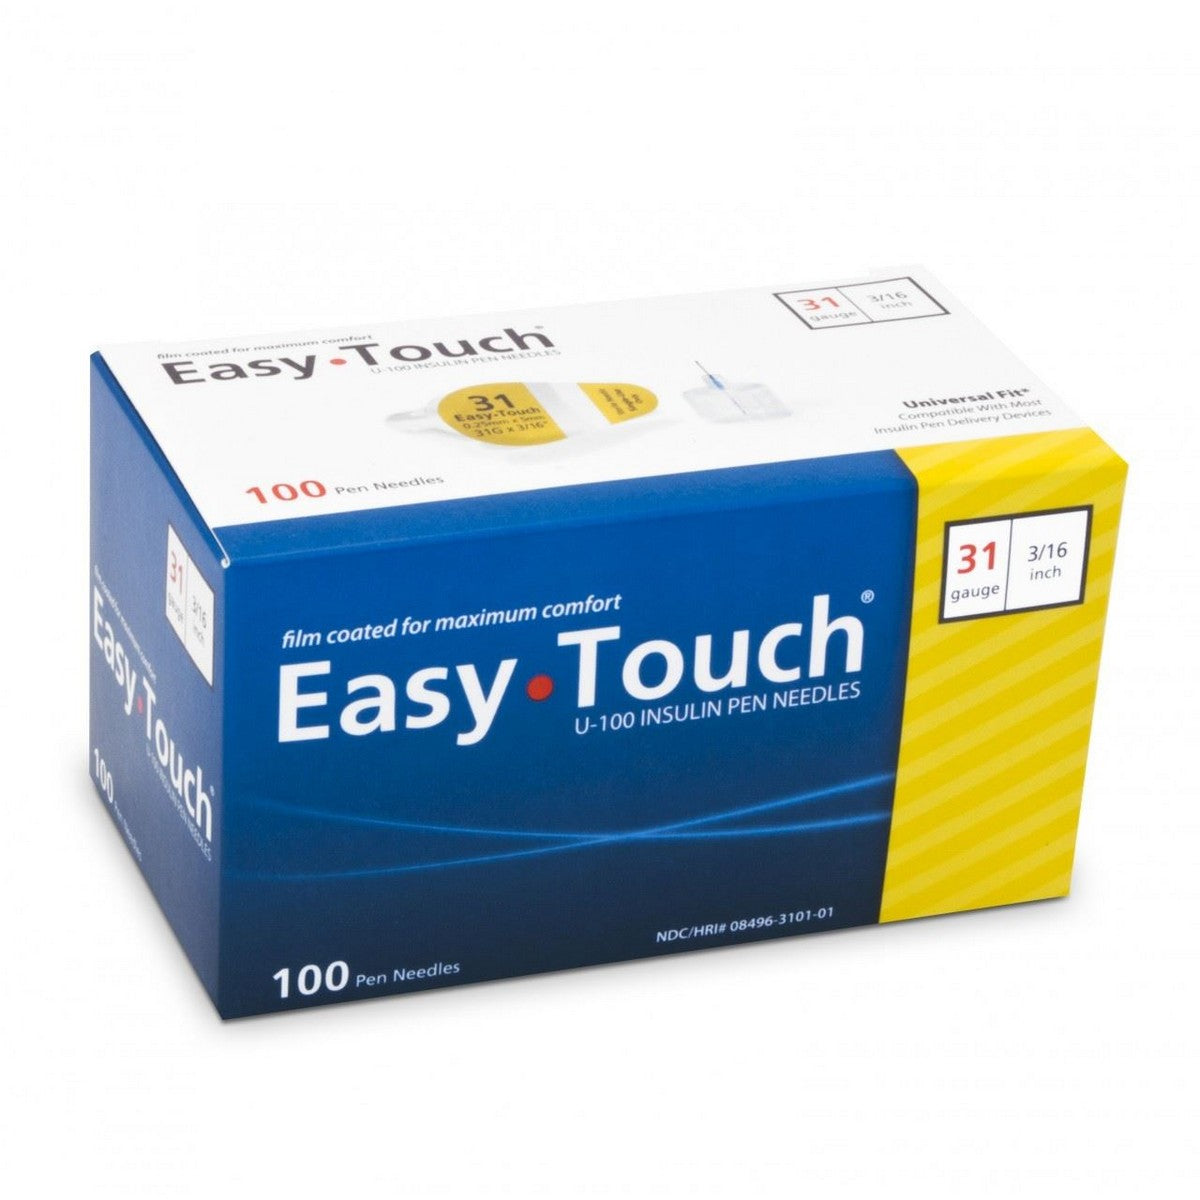 Easy Touch Easy Touch® Pen Needles – 100 count, 31g, 3/16″ (5mm